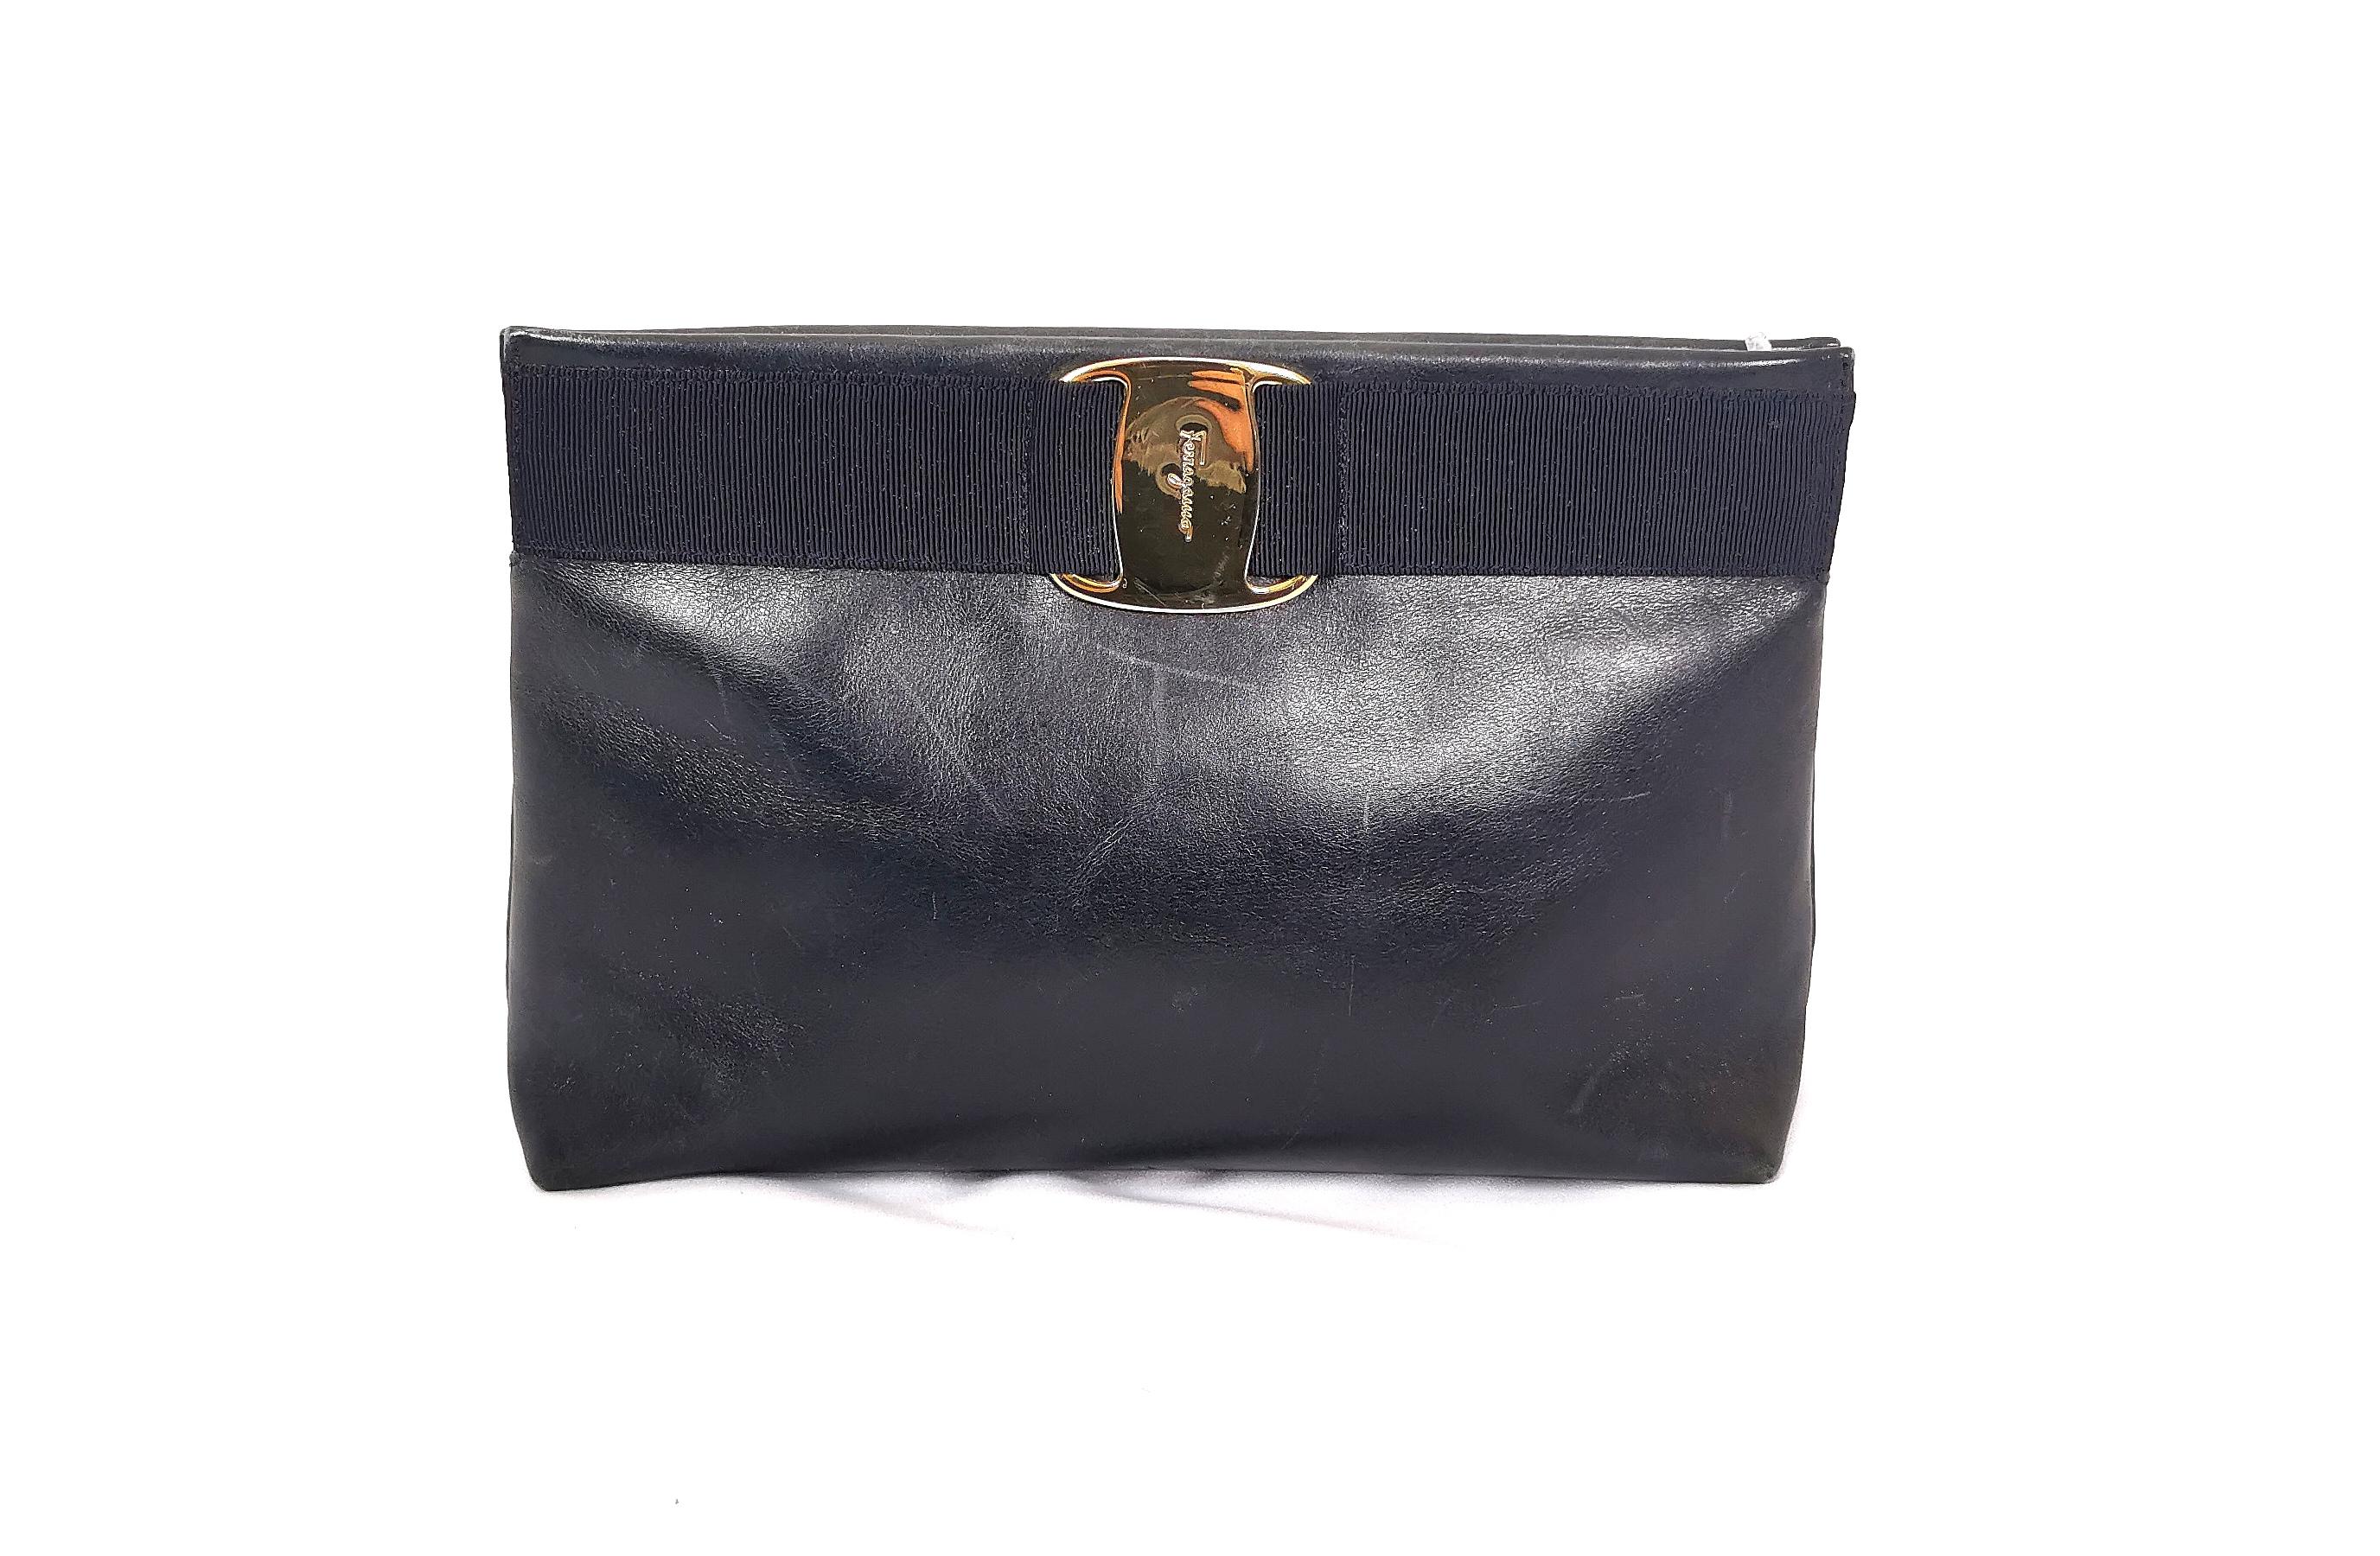 A stylish Vintage Salvatore Ferragamo shoulder x clutch bag.

This is a very versatile handbag and can be used as a clutch, crossbody or shoulder bag.

Made from Dark navy blue leather it has gold tone hardware with a wide elastic strap across the